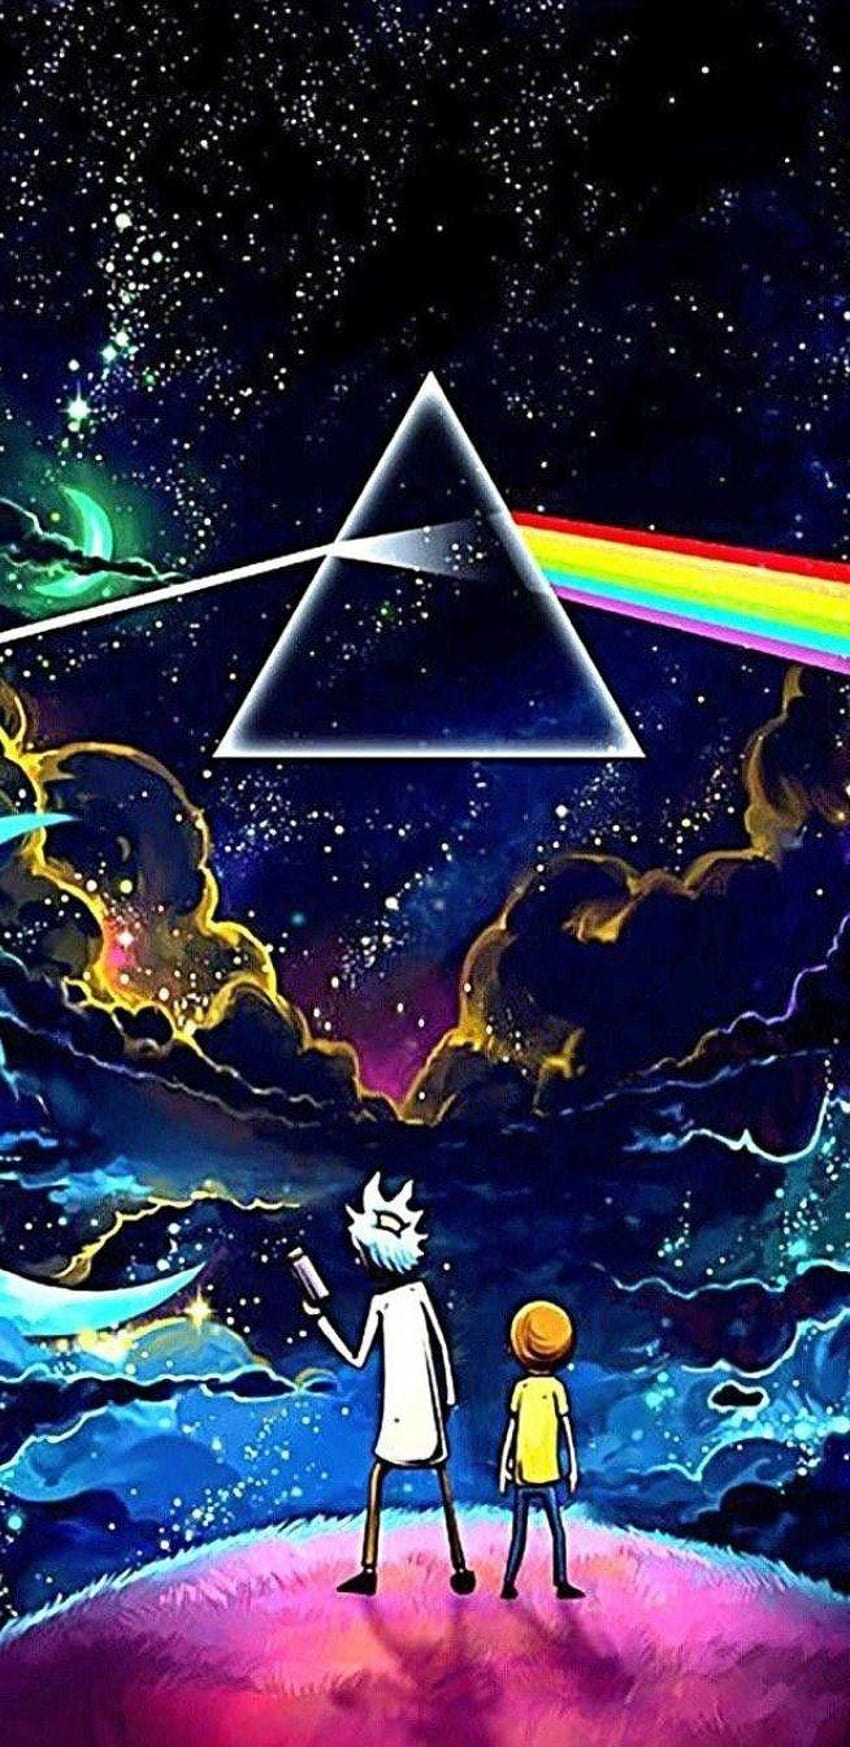 Rick and Morty, pink floyd 2019 HD phone wallpaper